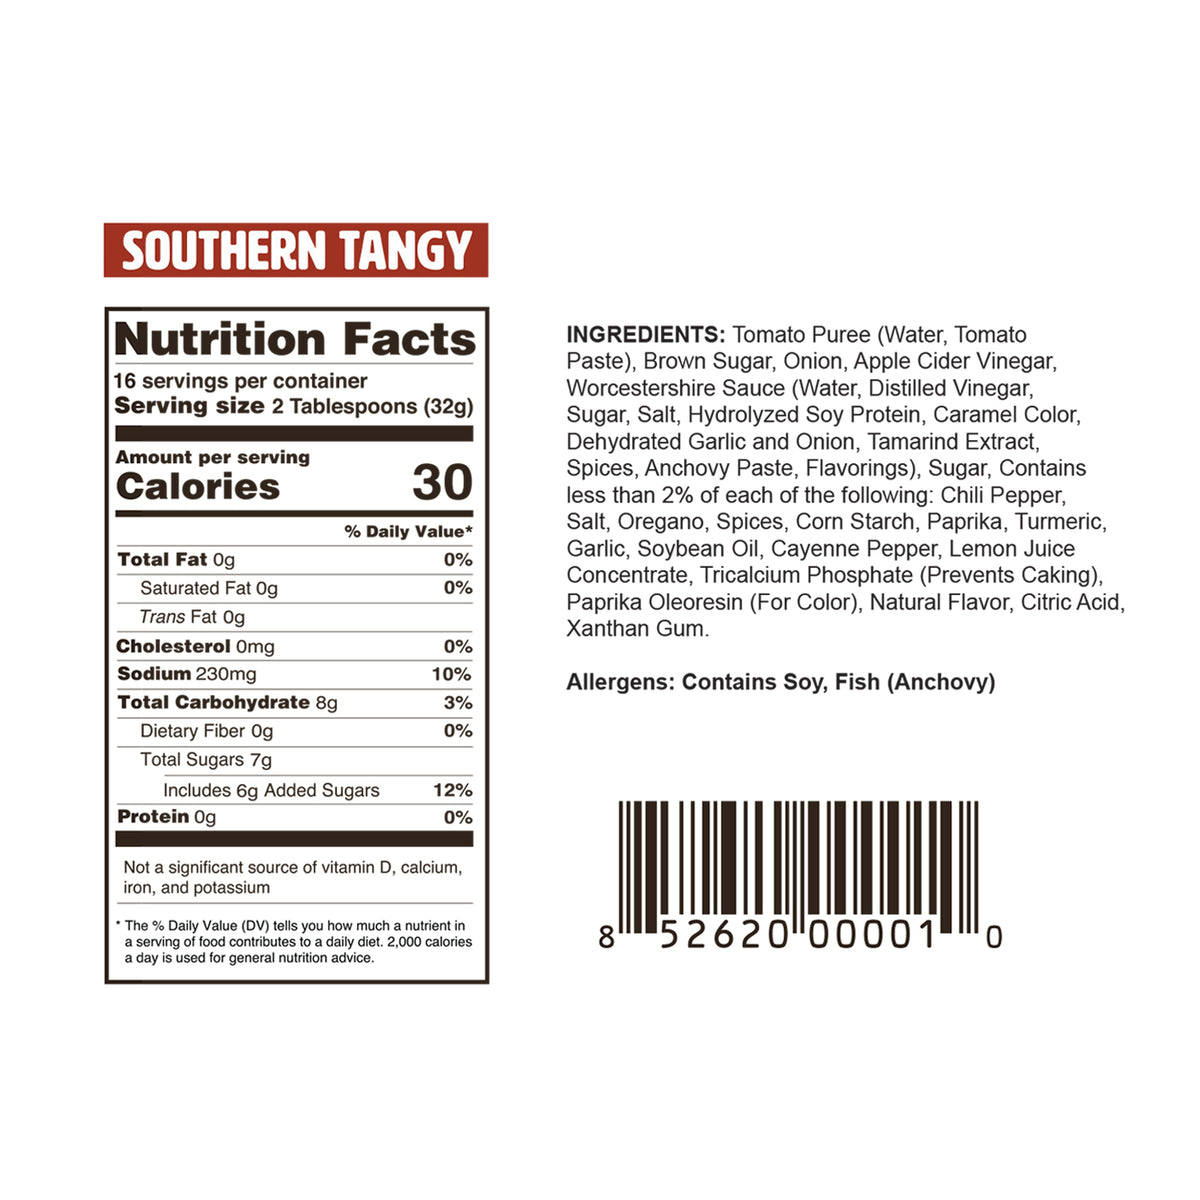 Southern Tangy